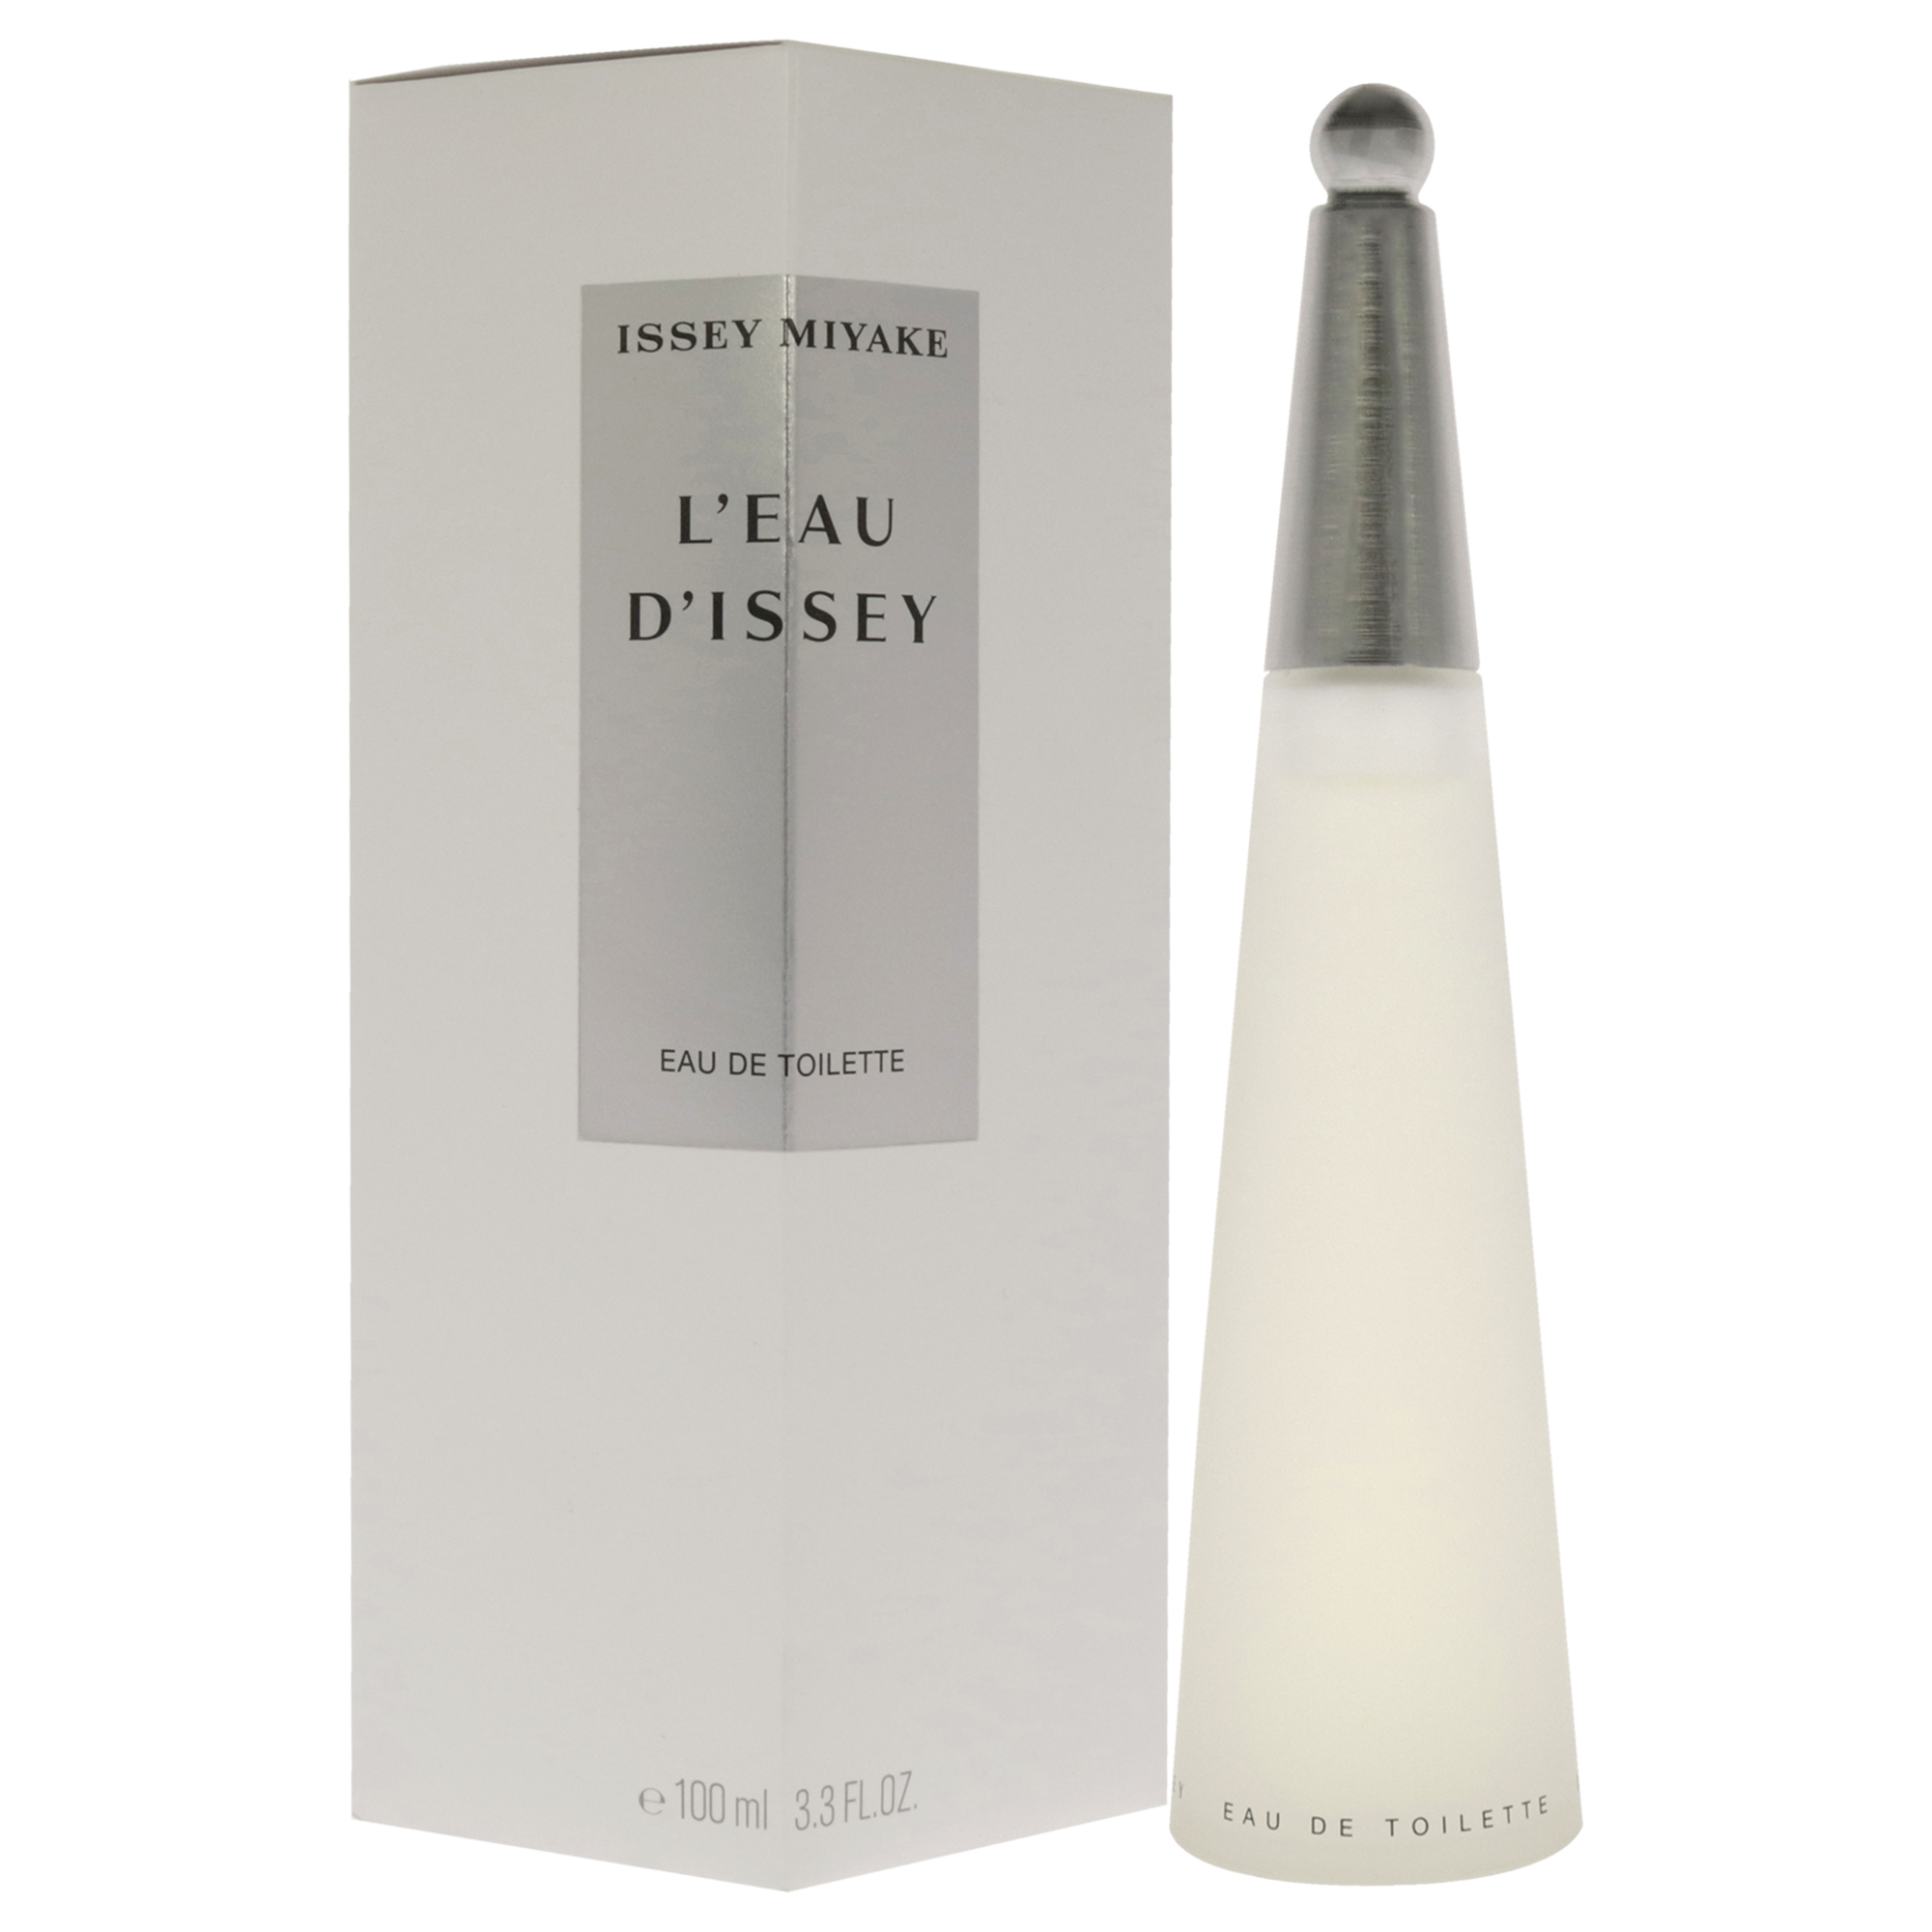 Leau Dissey by Issey Miyake for Women - 3.3 oz...